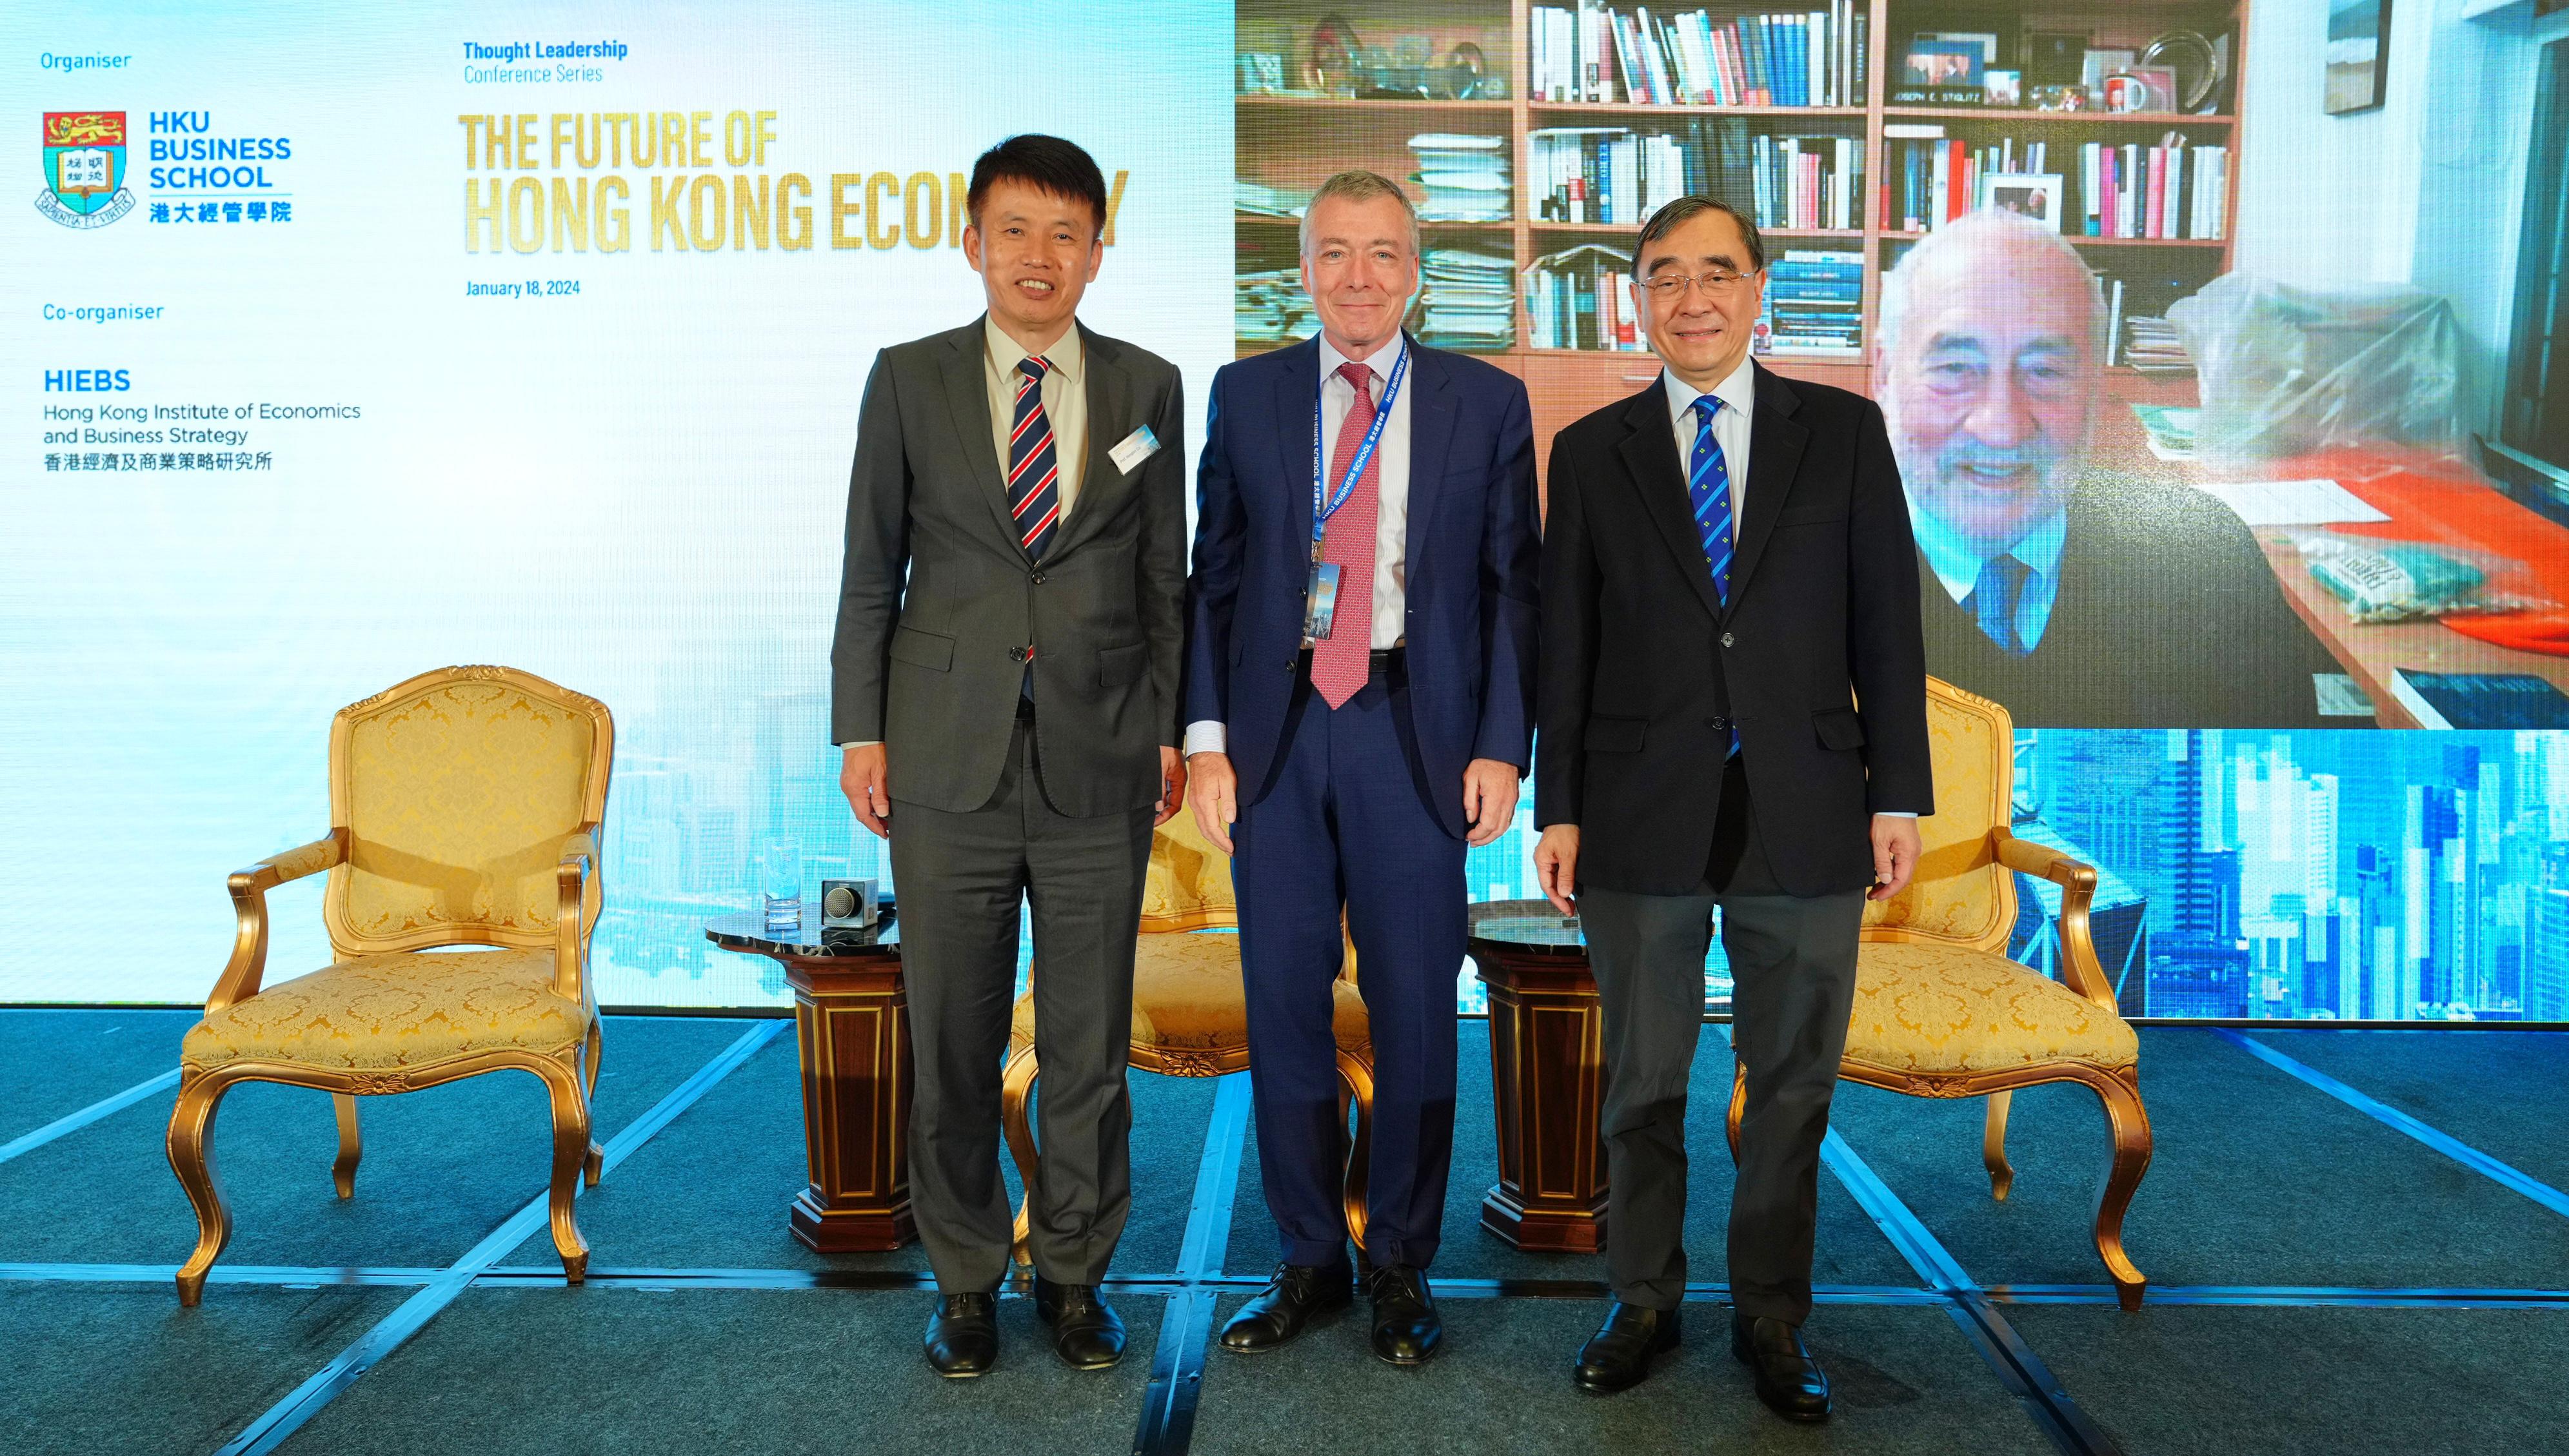 (From left) Professor Hongbin Cai, Dean and Chair of Economics of HKU Business School; Professor Christoph H Loch, Professor of Operations & Technology Management, Co-Director of the Cambridge Centre for Chinese Management, and Former Dean of Cambridge Judge Business School and Editor-in-Chief of Management Science; Professor Richard Wong, Provost and Deputy Vice-Chancellor of The University of Hong Kong, Chair of Economics & Philip Wong Kennedy Wong Professor in Political Economy, and Director of Hong Kong Institute of Economics and Business Strategy; Professor Joseph Stiglitz, Nobel Memorial Prize laureate in Economic Sciences; engaged in a panel discussion.